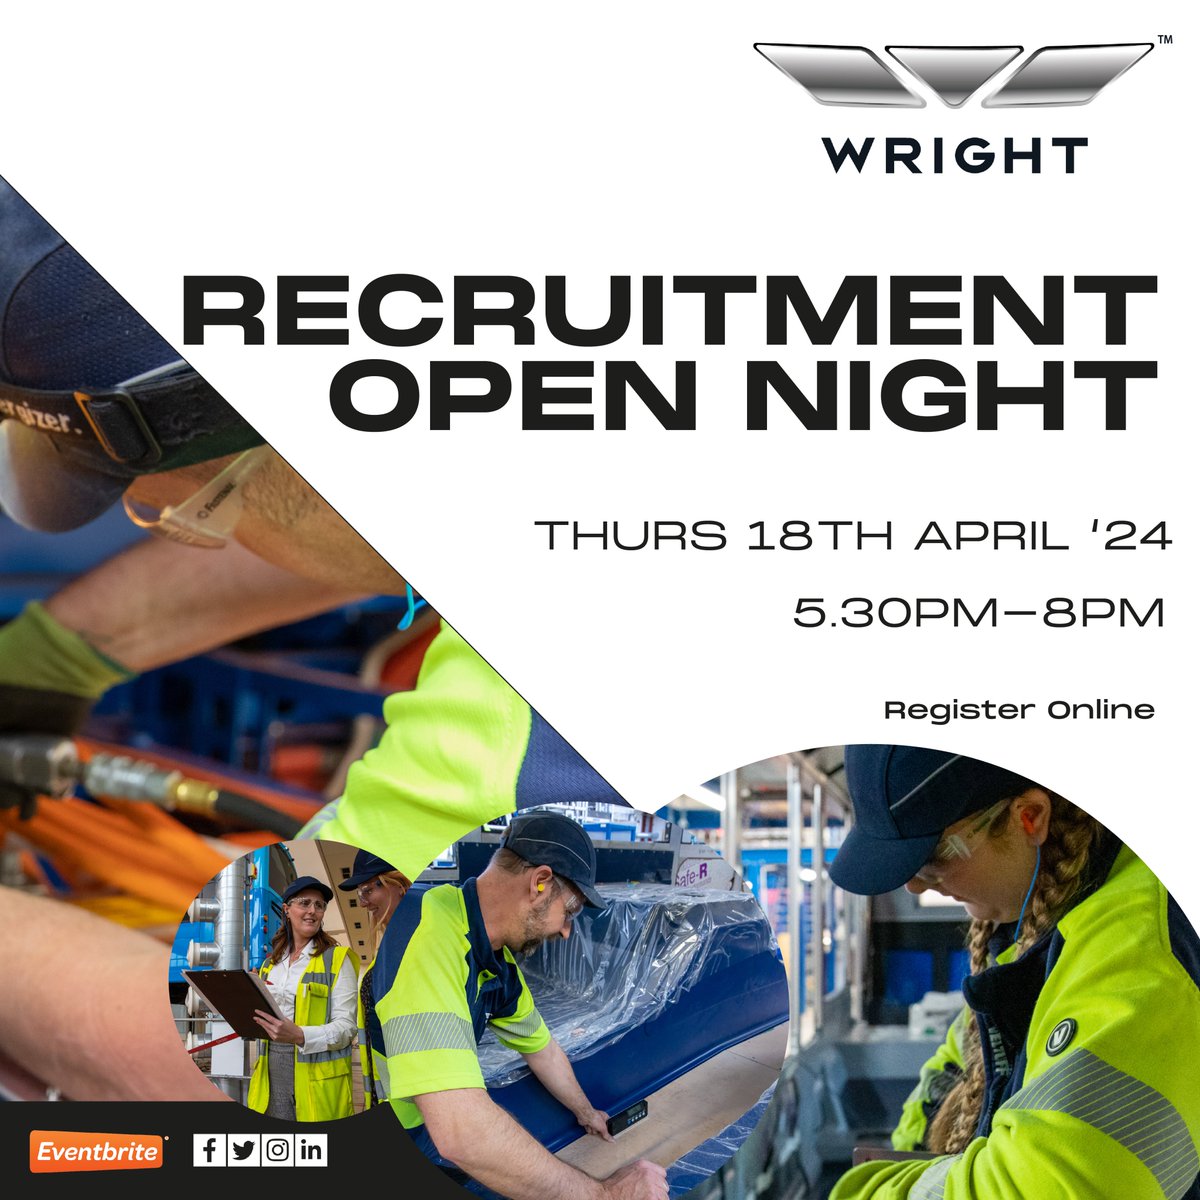 .@Wright_bus Recruitment Open Night | Thurs 18th April Join us to find the perfect role for you at Wrightbus Register online: eventbrite.co.uk/e/wrightbus-re… Everyone welcome! #Wrightbus #DrivingAGreenerFuture #Recruiting